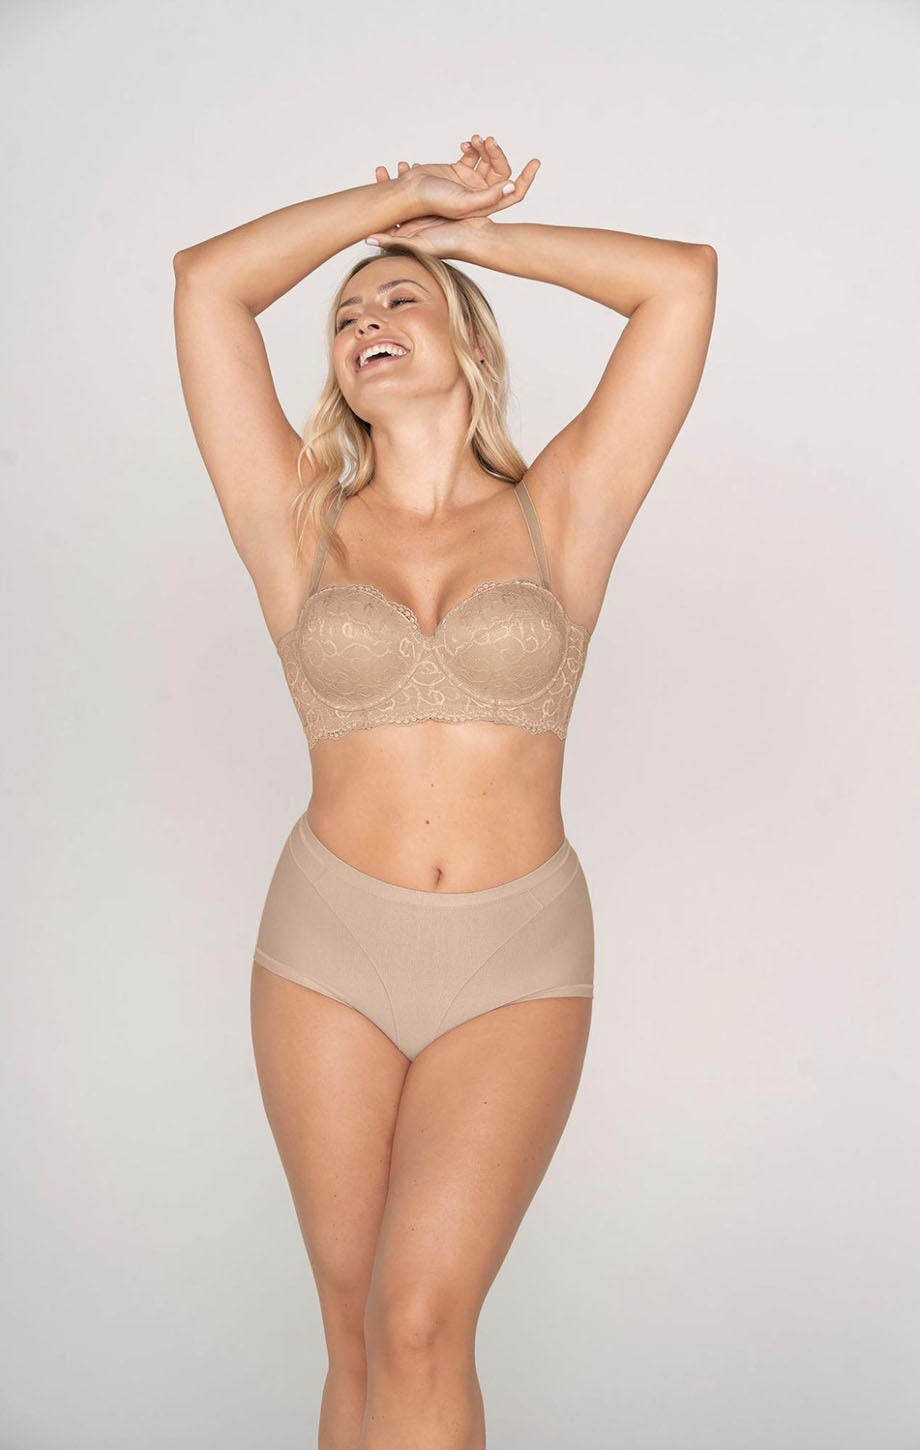 How lingerie can help lift your mood – Curvy Kate CA